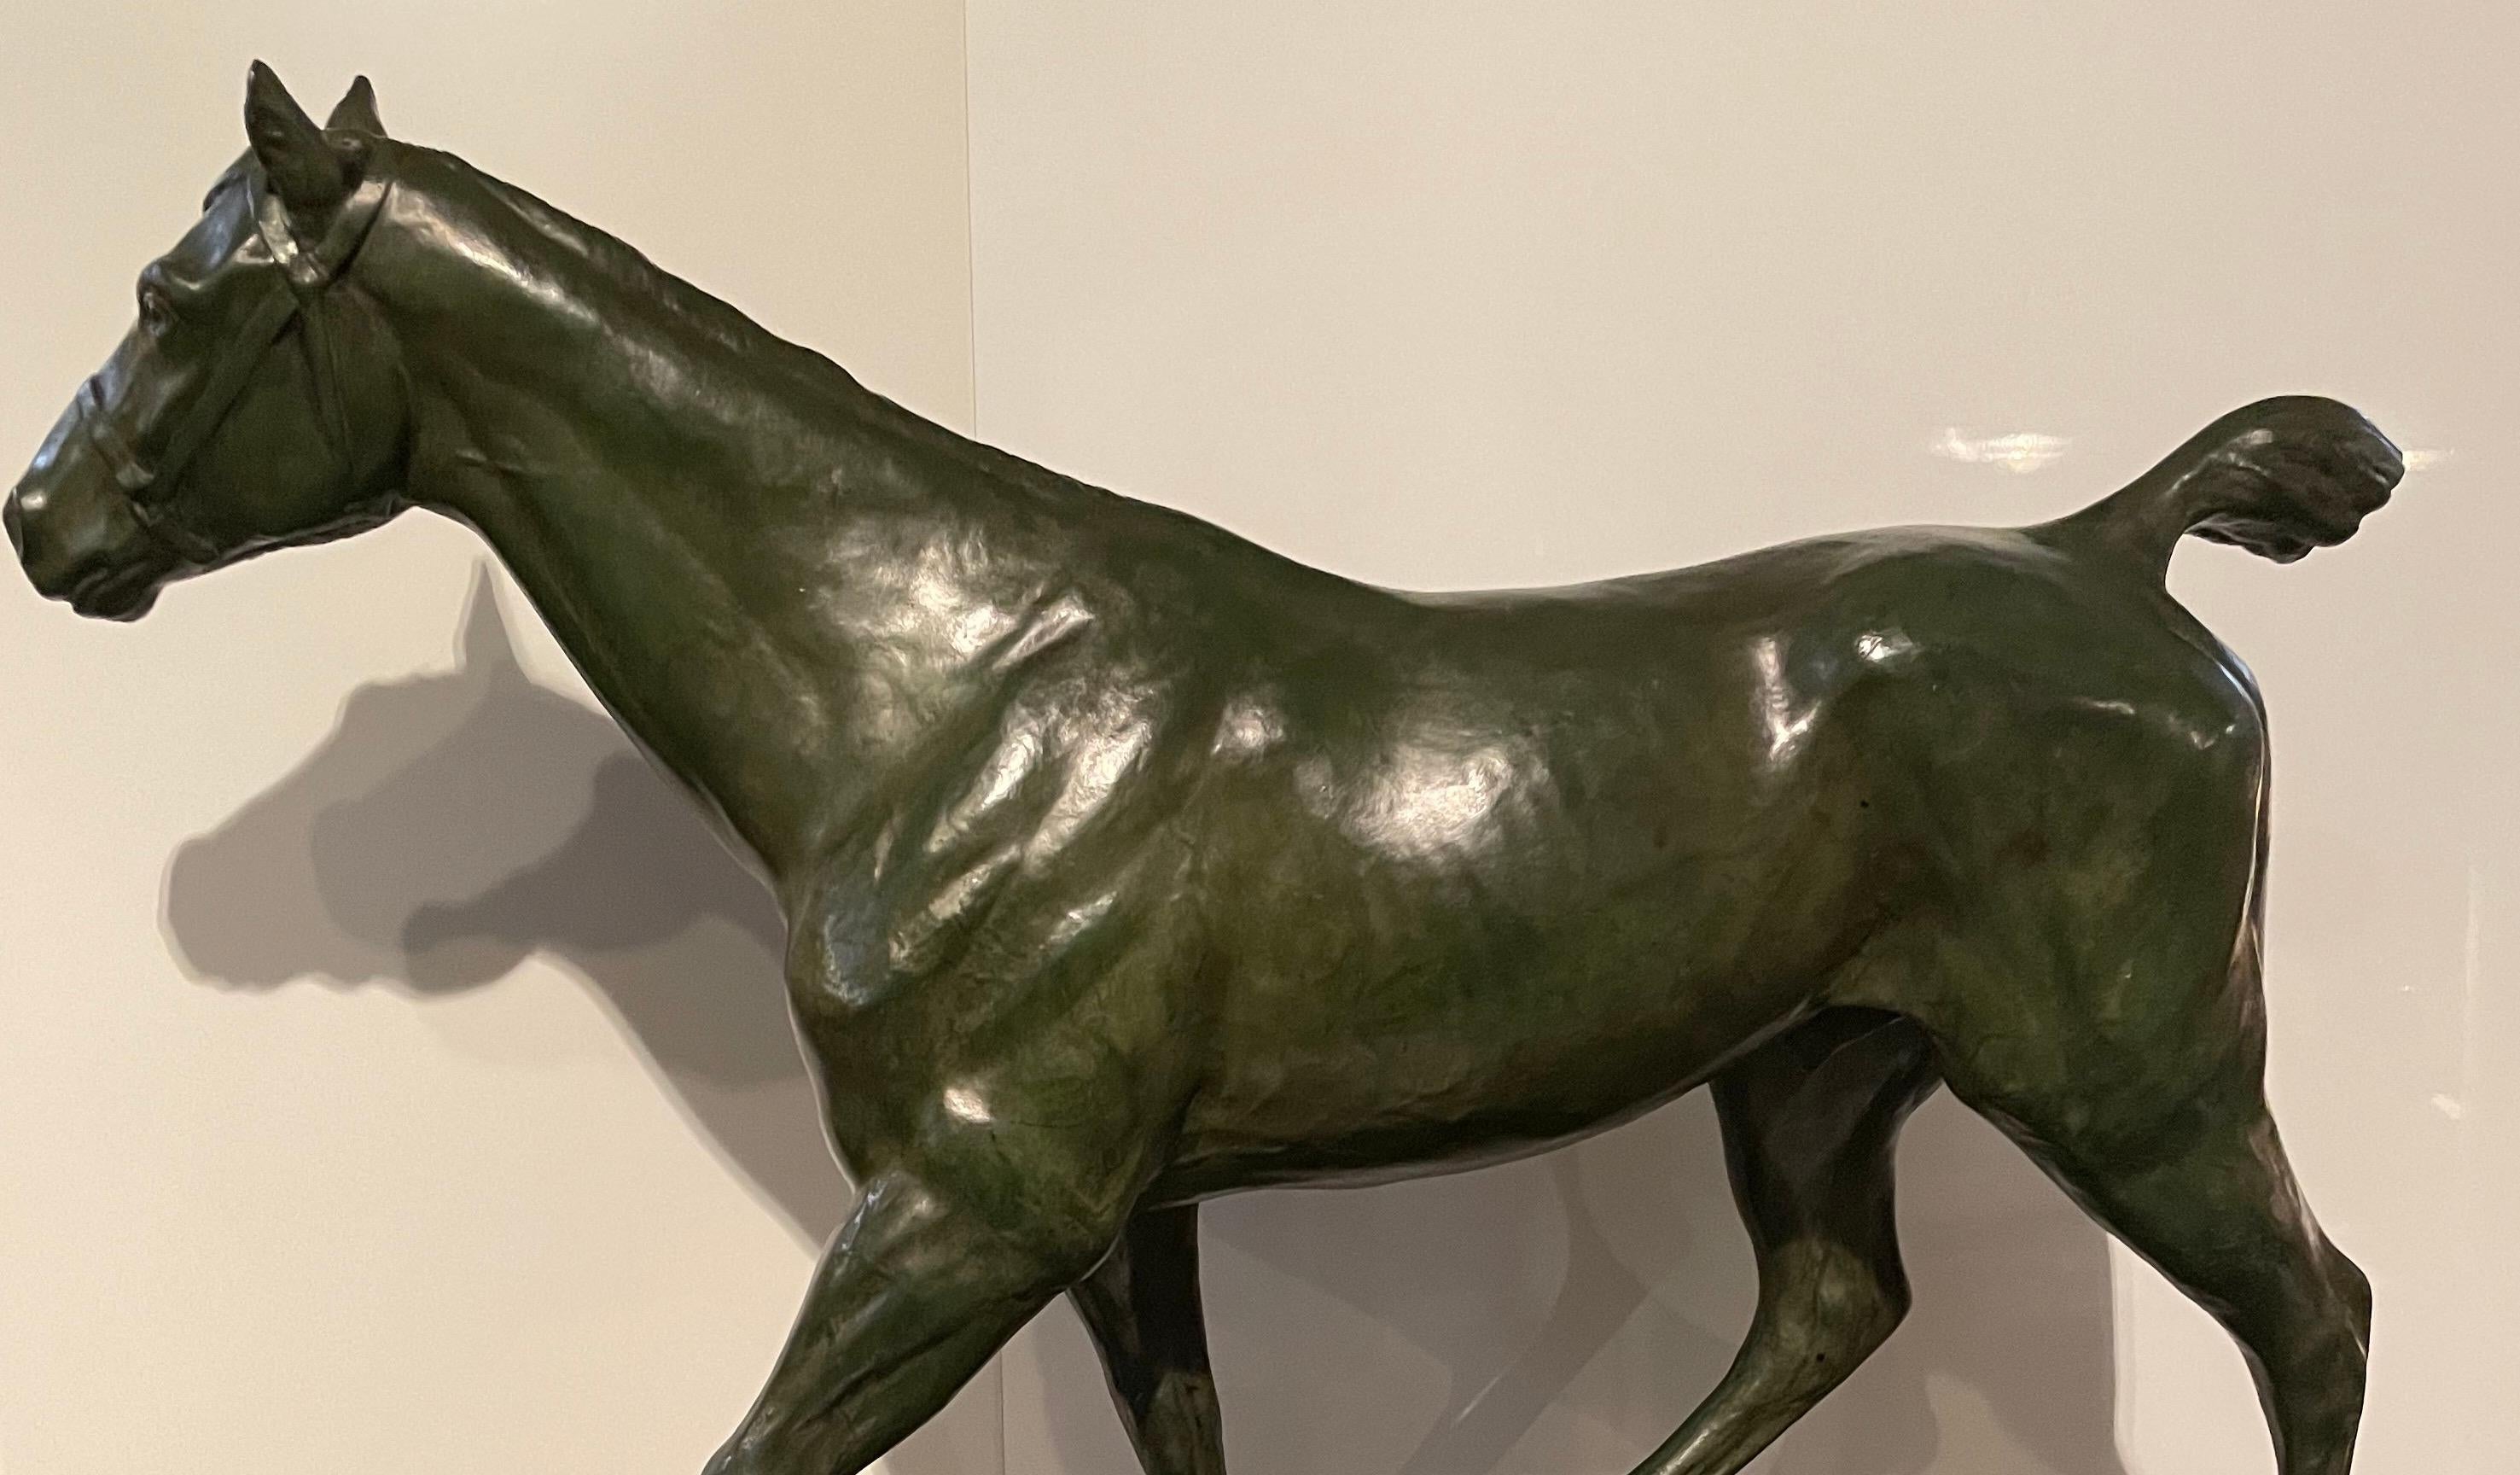 Horse walking in bronze with green patina. 
Signed on the base M.de Mathelin 1900. 
Maurice de Mathelin was a famous Belgian sculptor lived between 1854 and 1905. 
His works are presents in public buildings  in Belgium